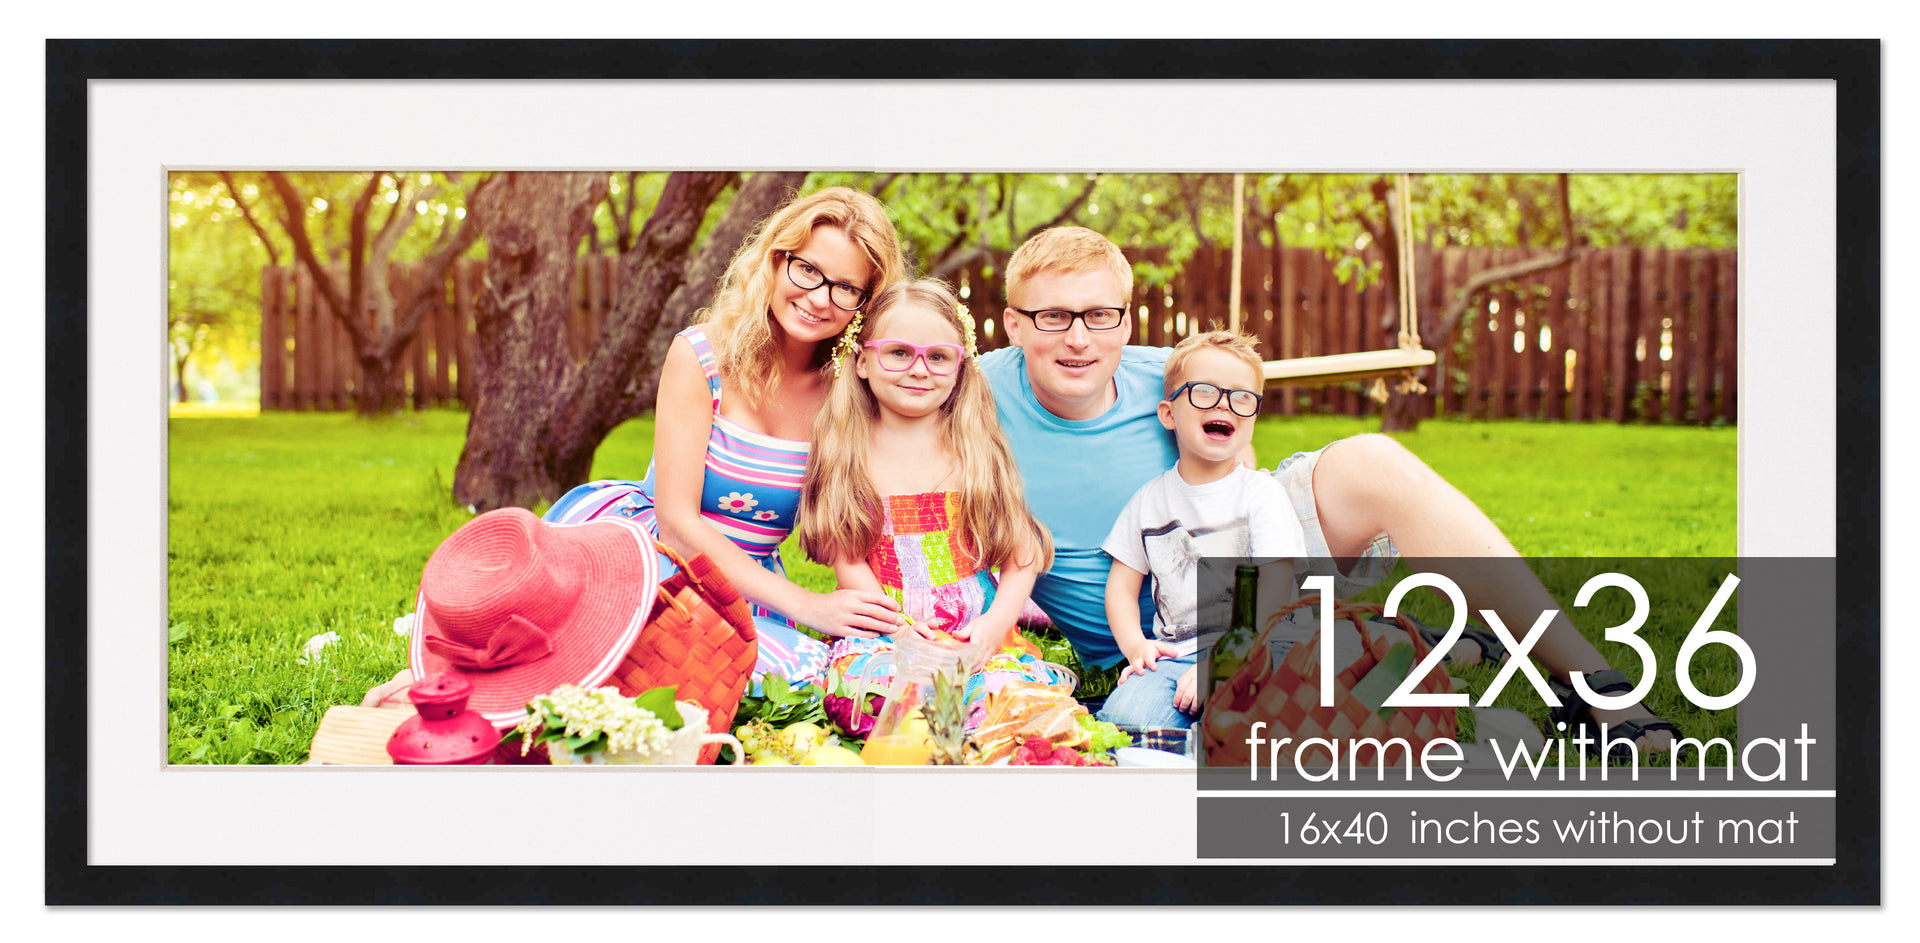 9-Pack, White, 6x6 Photo Frame (4x4 Matted)